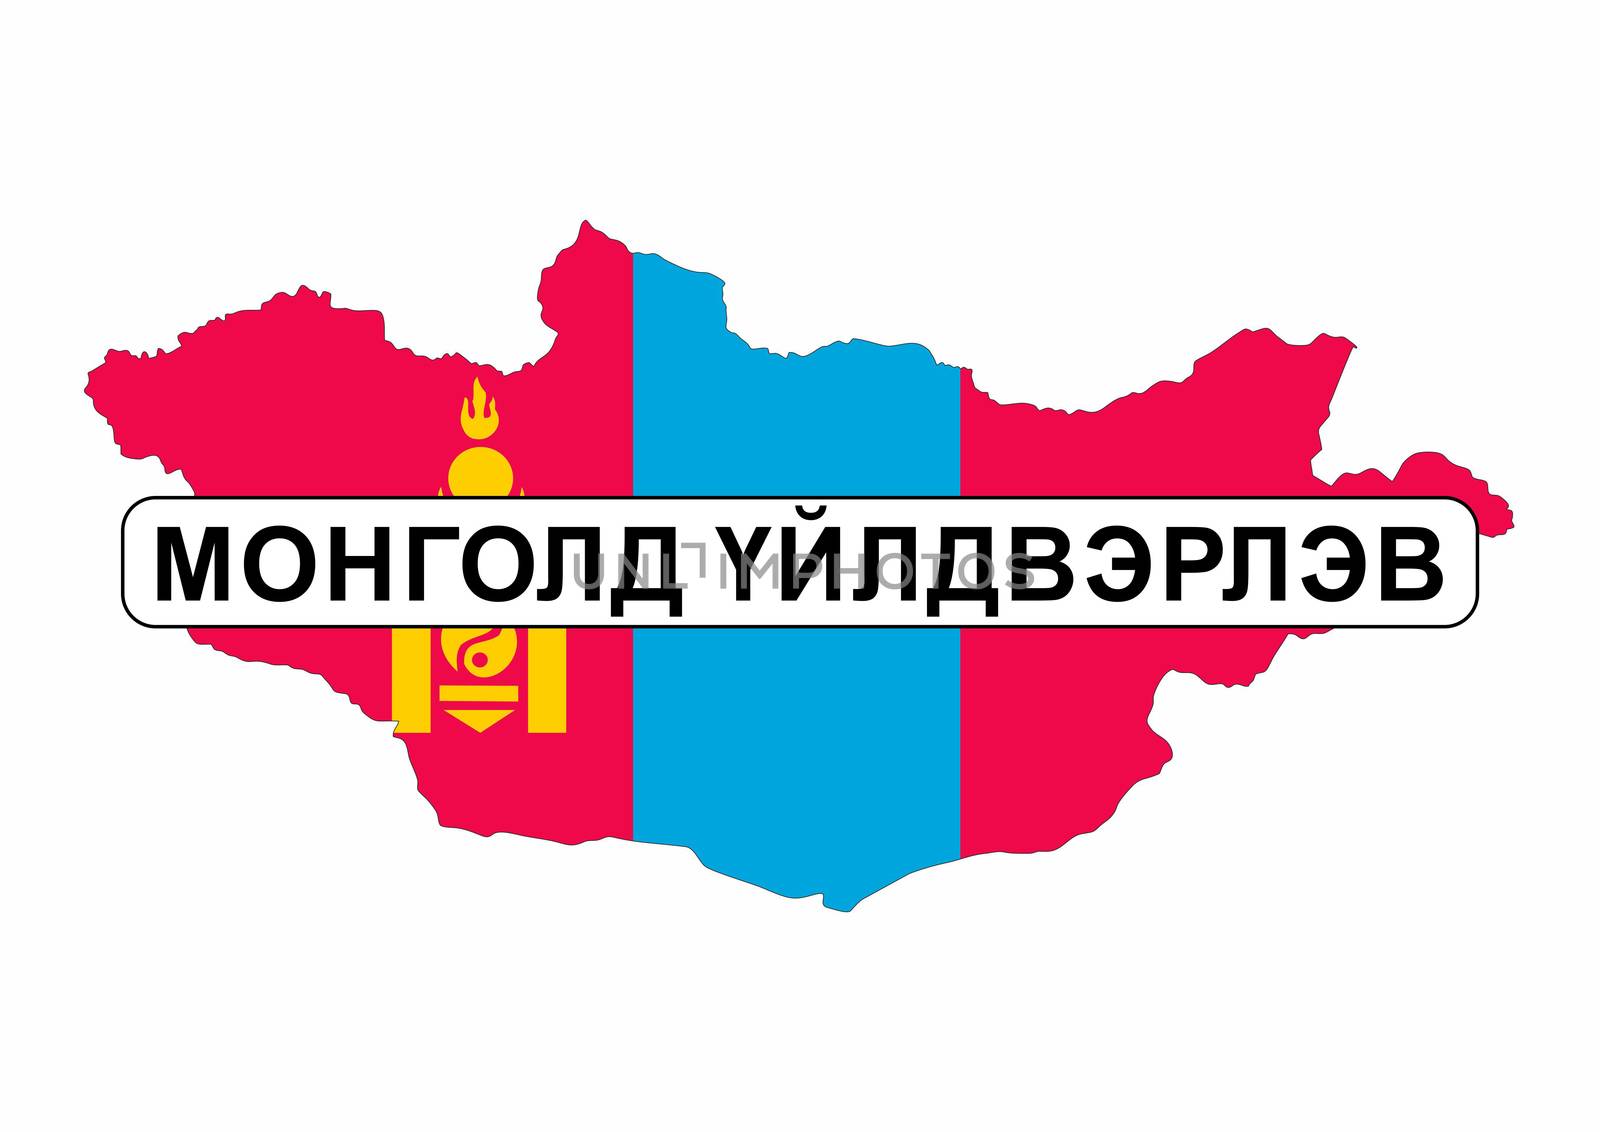 made in mongolia country national flag map shape with text